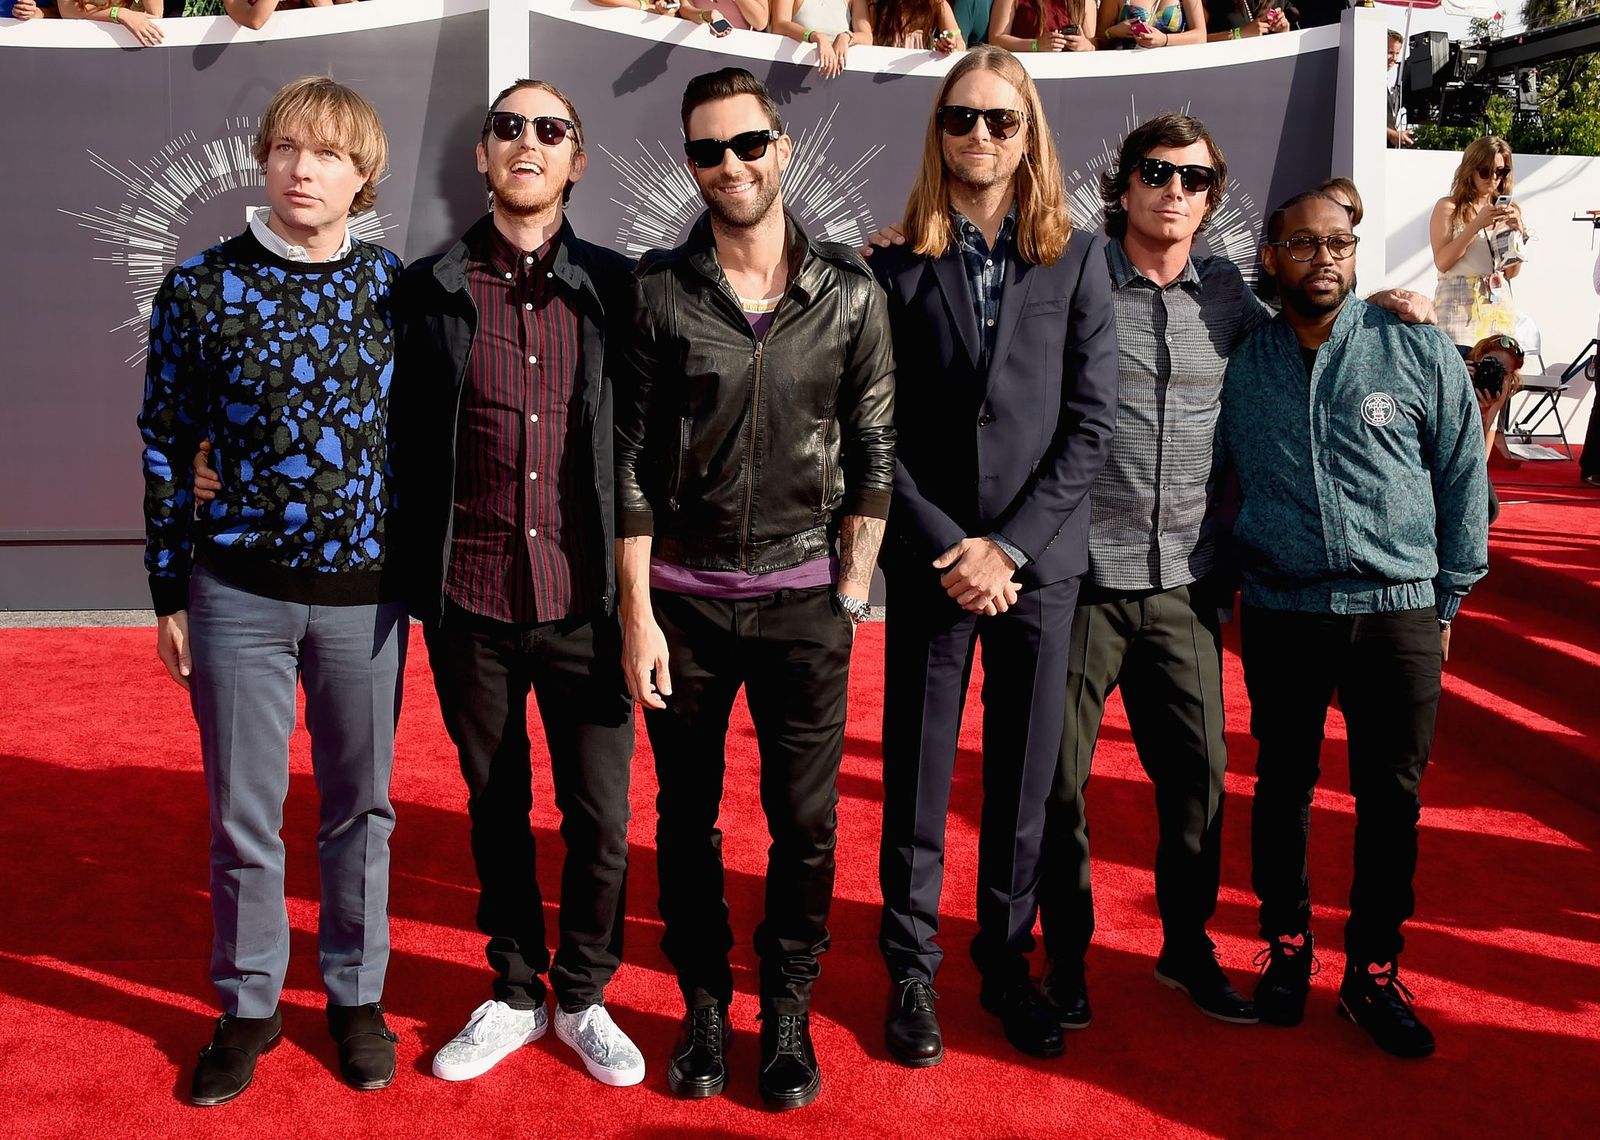 Maroon 5 at the MTV Video Music Awards on August 24, 2014, in Inglewood, California | Photo: Steve Granitz/WireImage/Getty Images